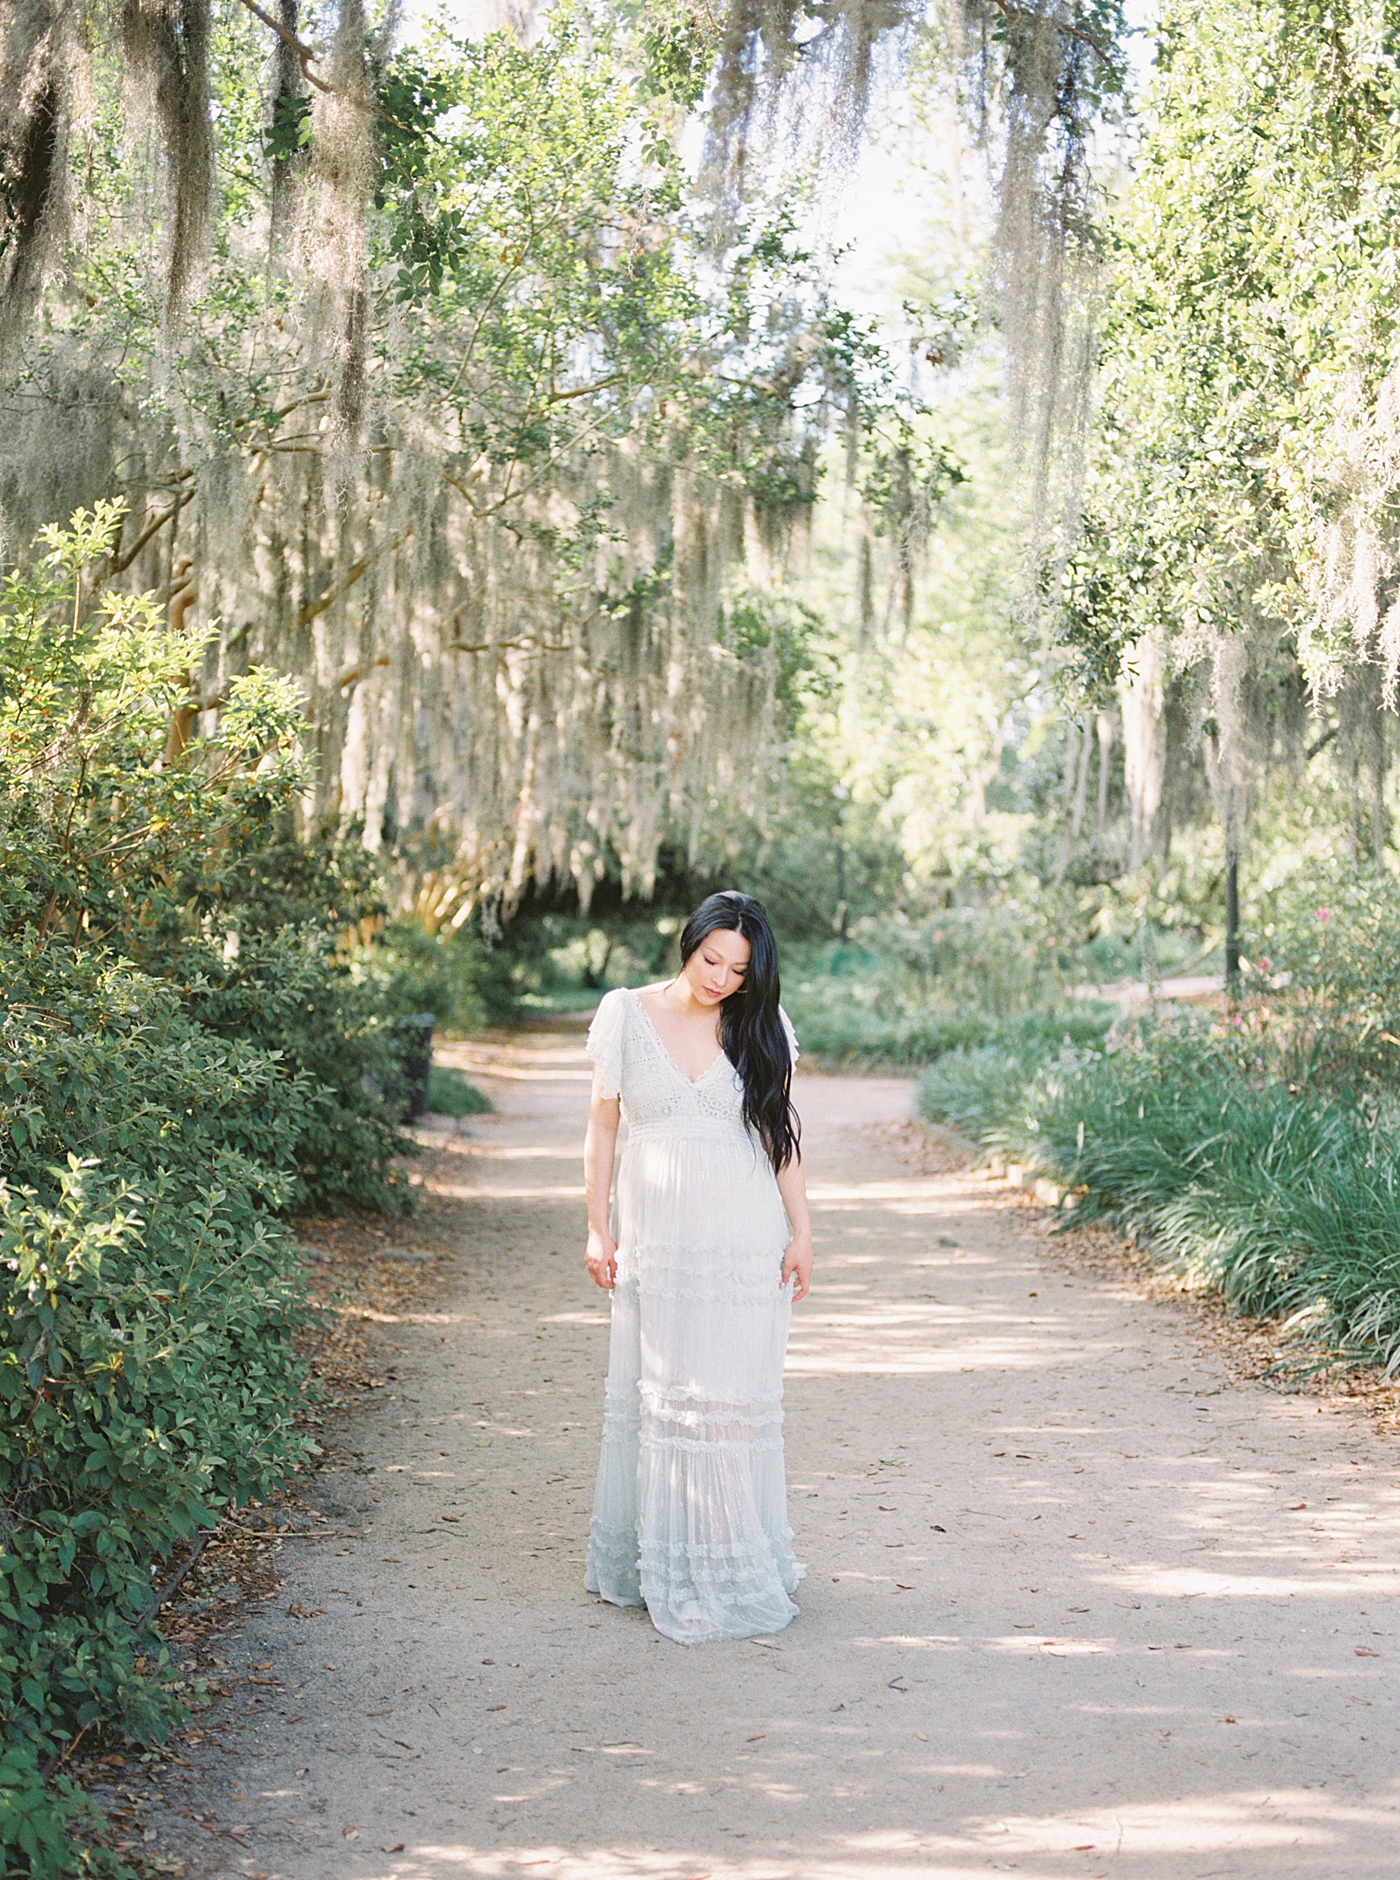 Mother to be walking down a path with spanish moss during maternity photos in Charleston | Photo by Caitlyn Motycka Photography